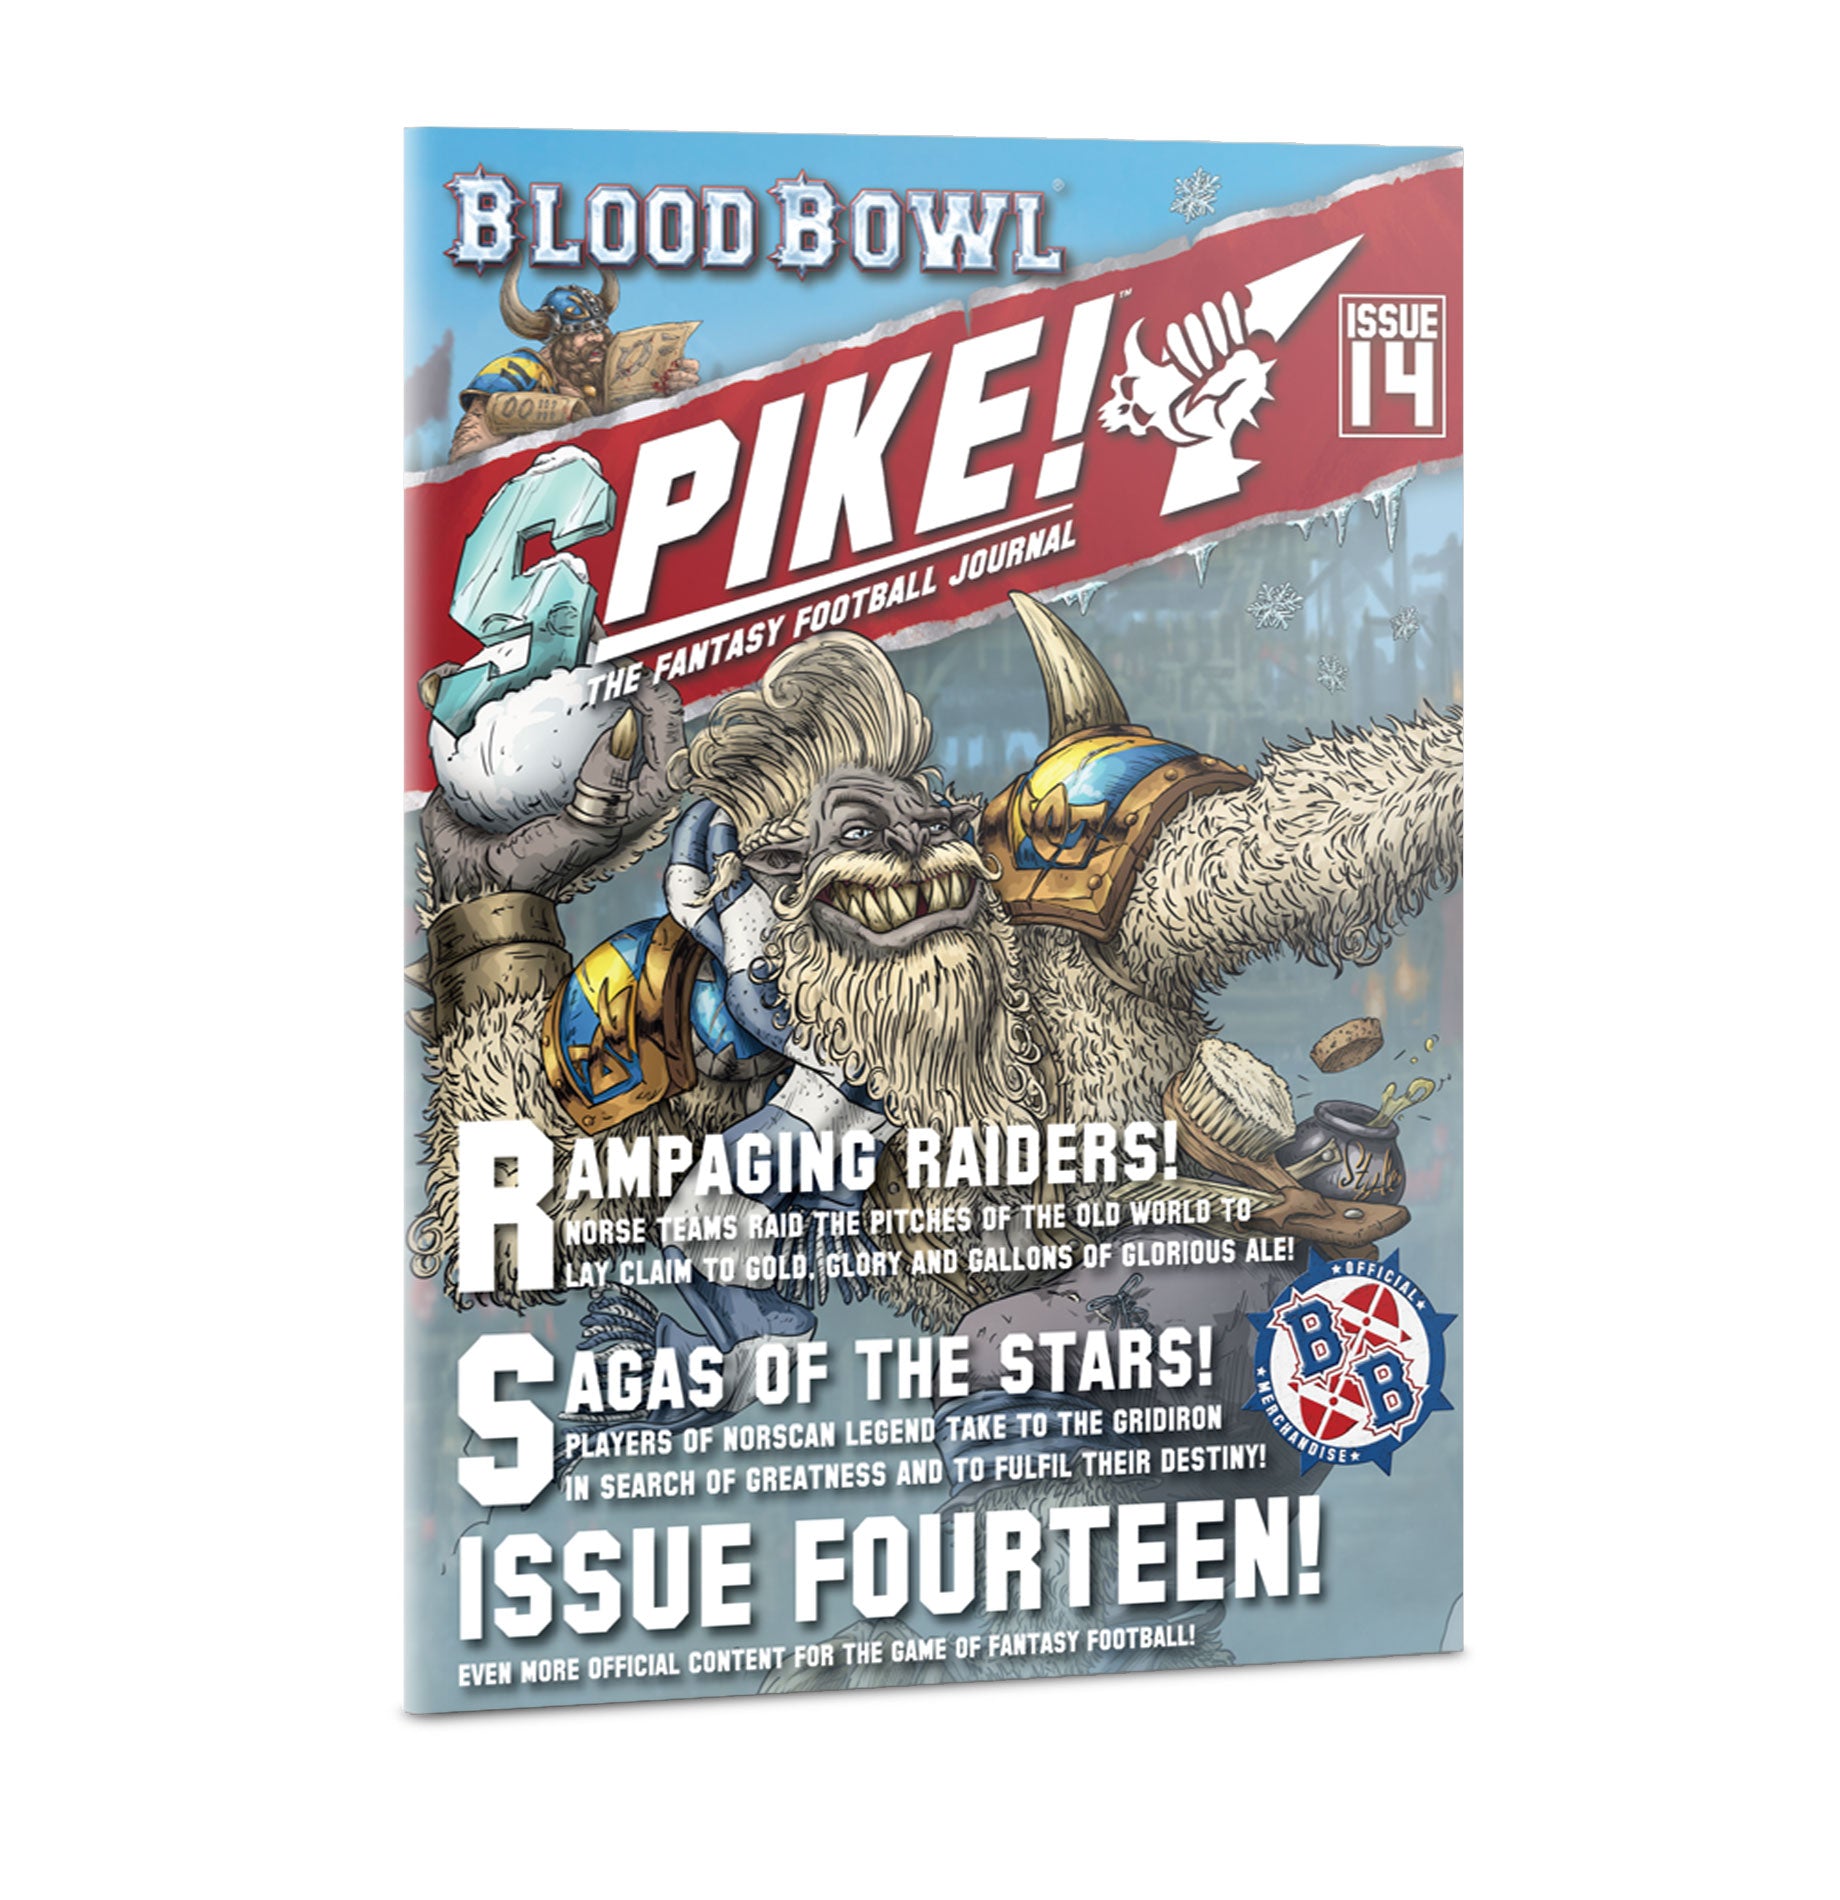 Blood Bowl: Spike Journal! Issue 14 - Bards & Cards